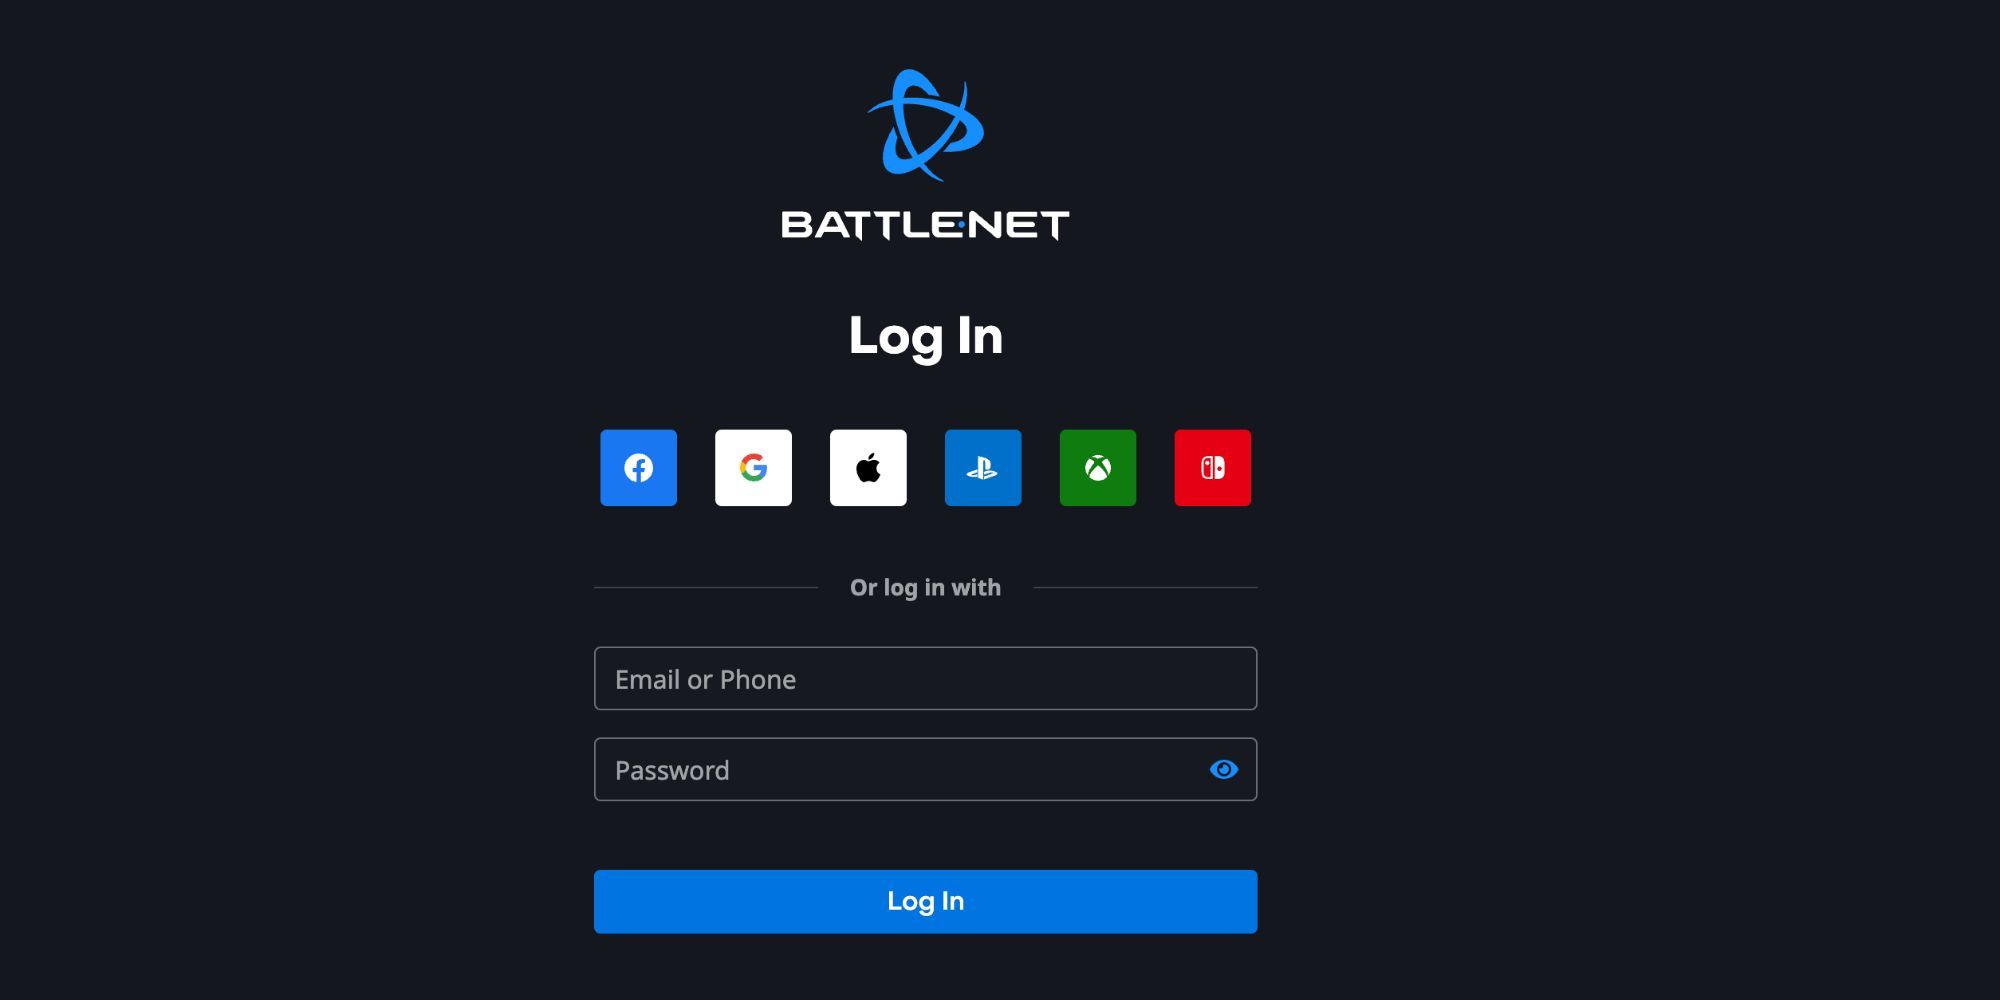 The login page for Blizzard BattleNet, showing options to link your account